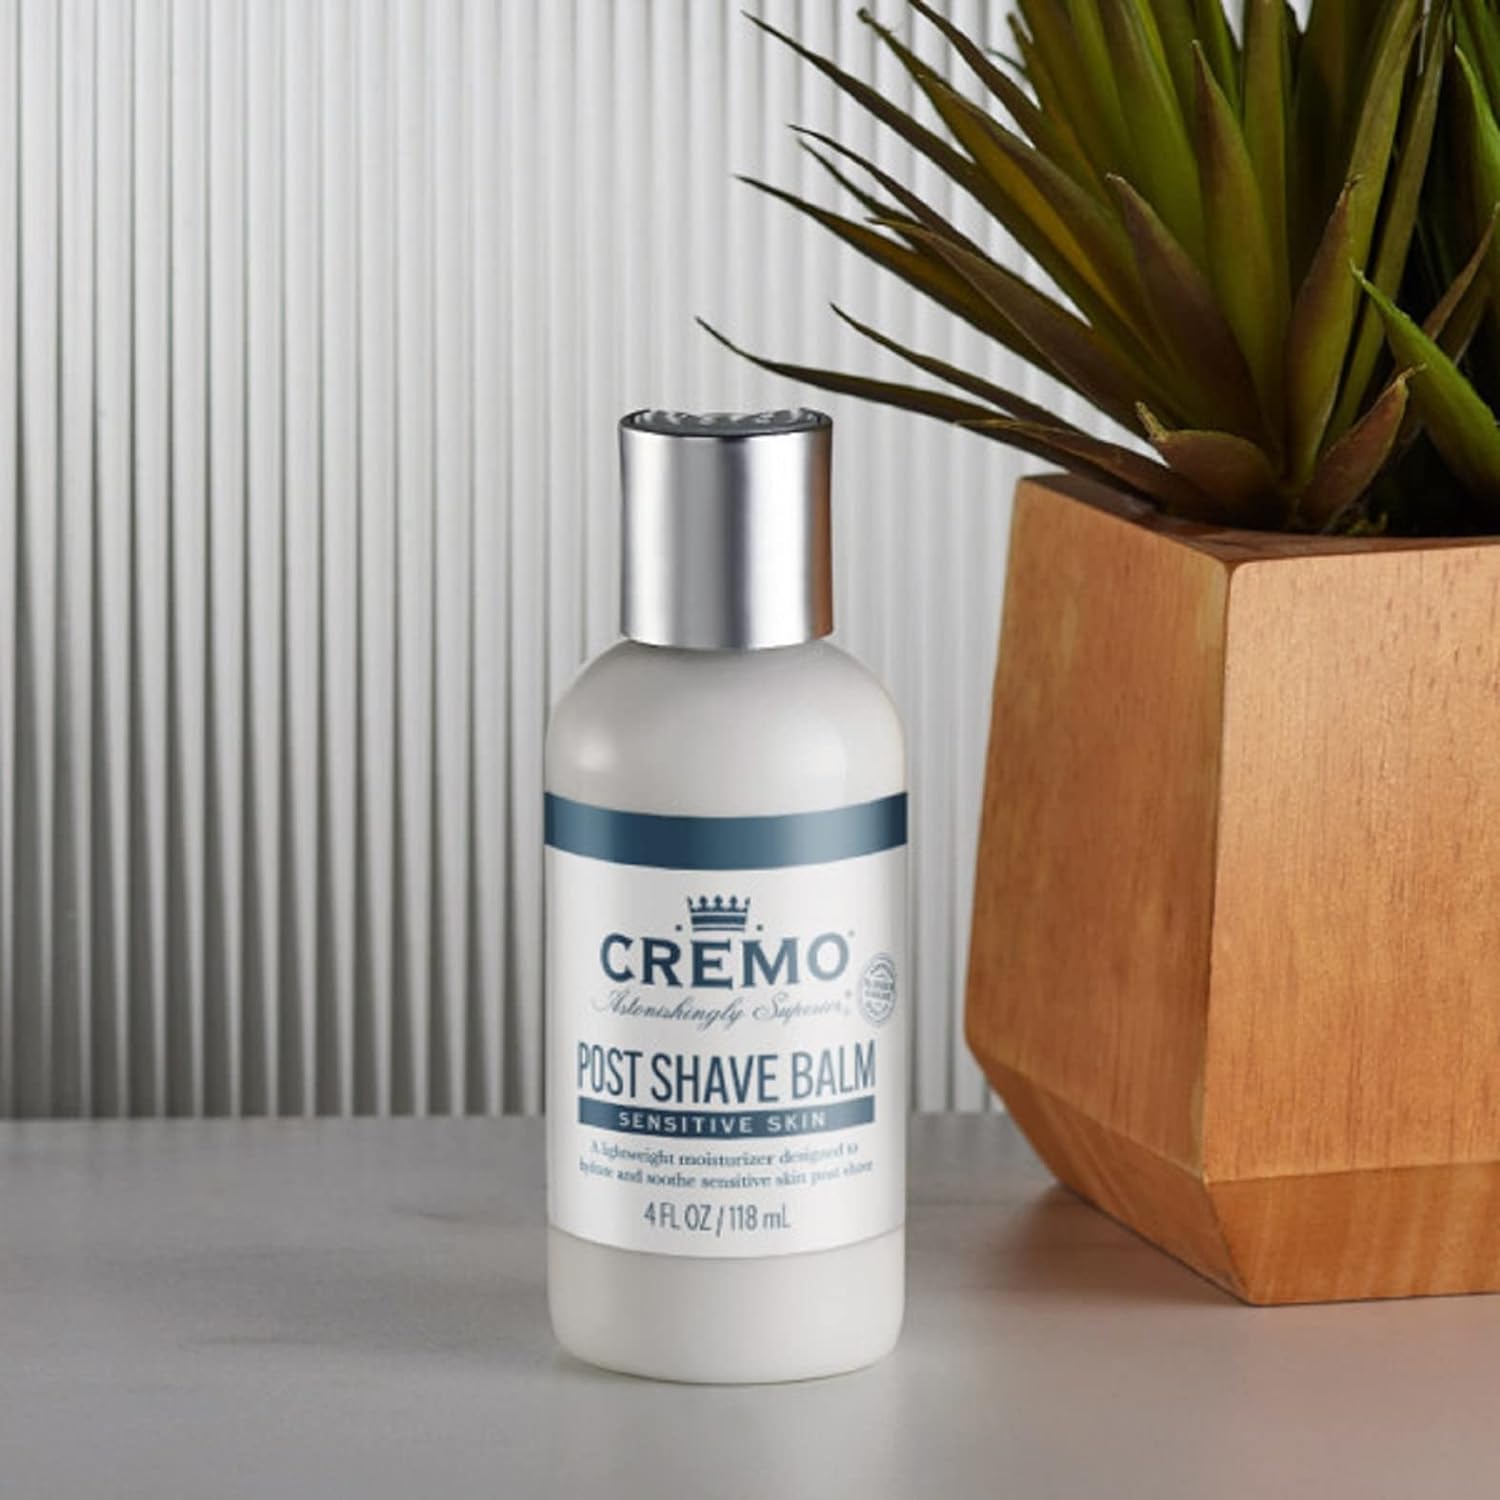 Cremo Sensitive Post Shave Balm, Soothes, And Protects Skin From Shaving Irritation, Dryness and Razor Burn, 4 Fluid Ounces : Beauty & Personal Care